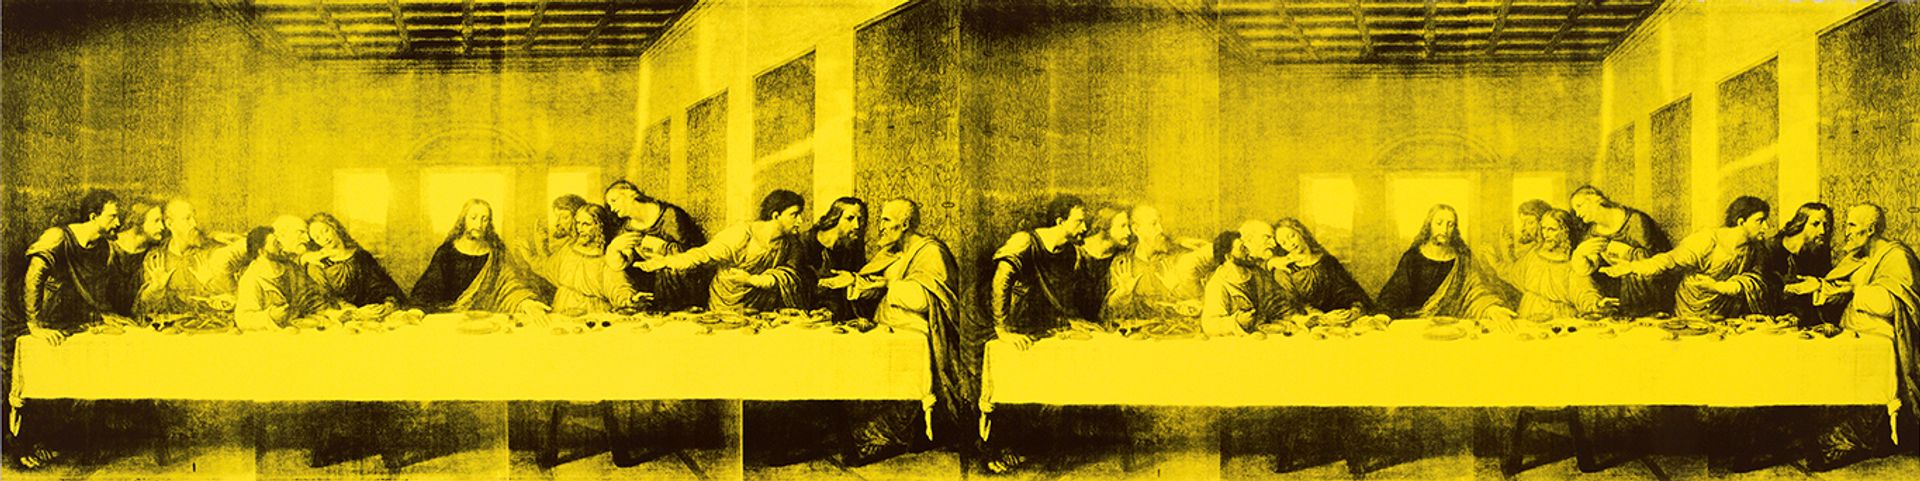 Andy Warhol, the Last Supper (1986) Courtesy of the Baltimore Museum of Art